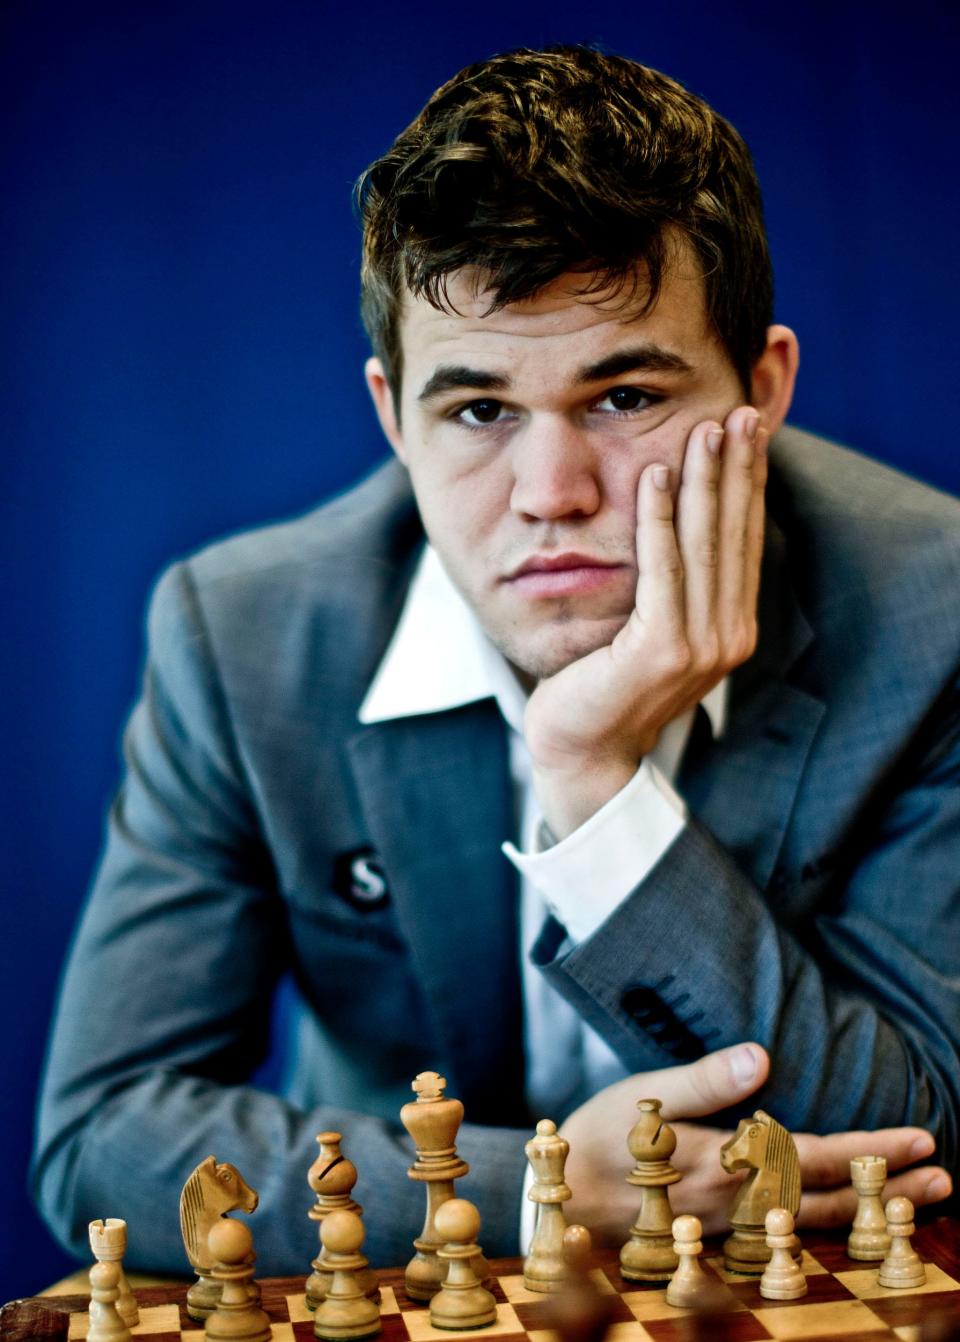 Magnus Carlsen poses for a portrait in front of a chess set in 2013.